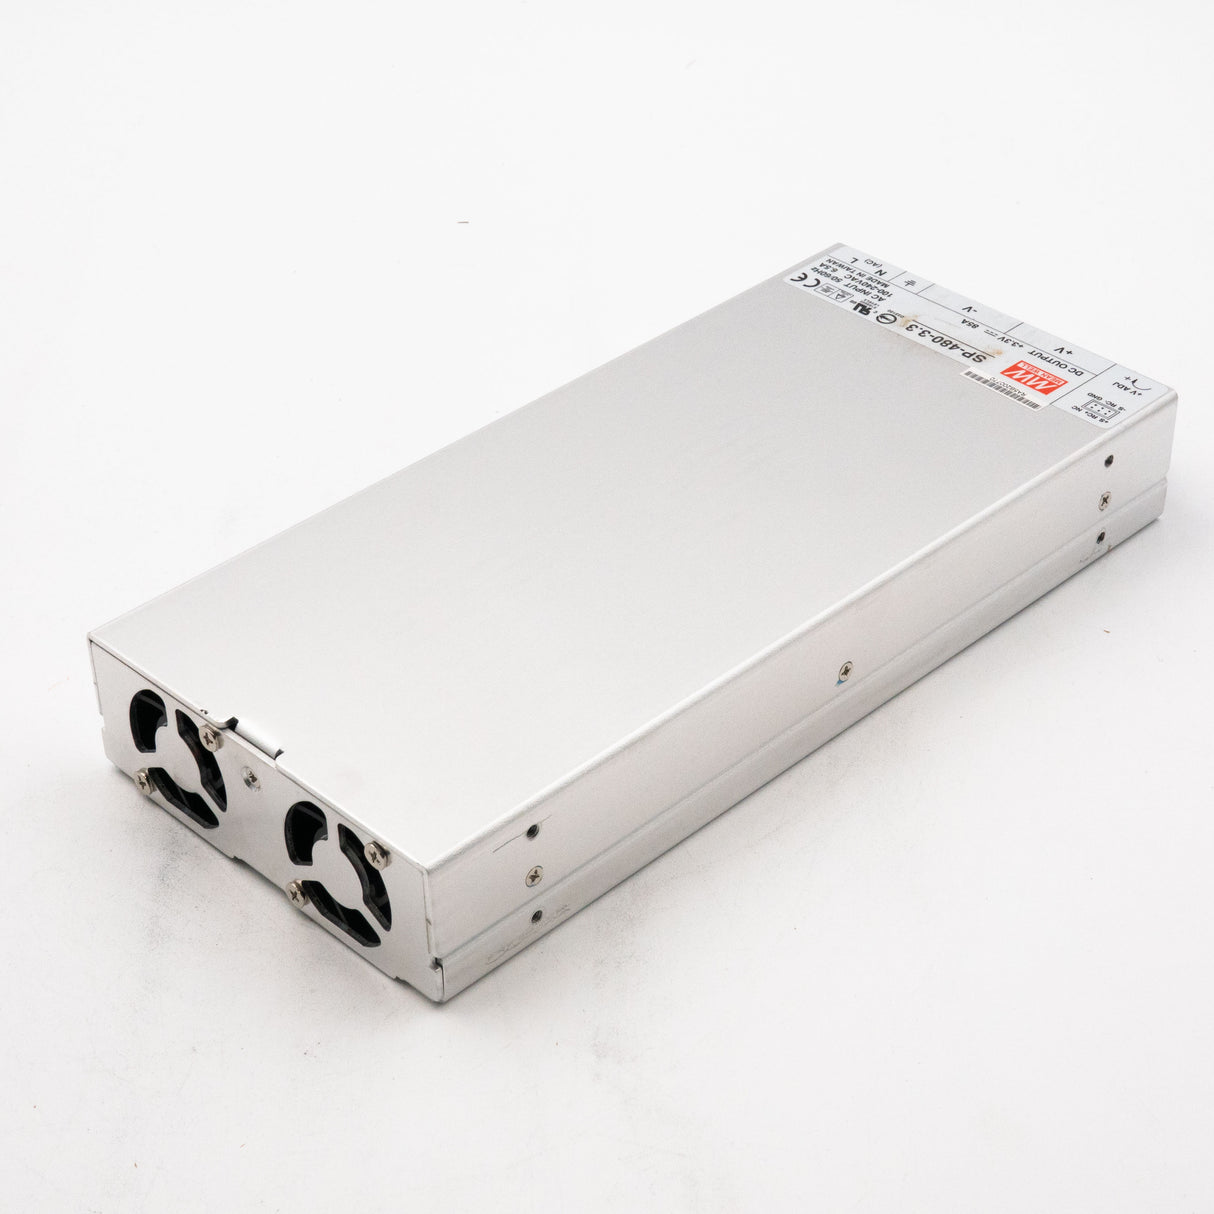 Mean Well SP-480-3.3 Power Supply 480W 3.3V - PHOTO 4